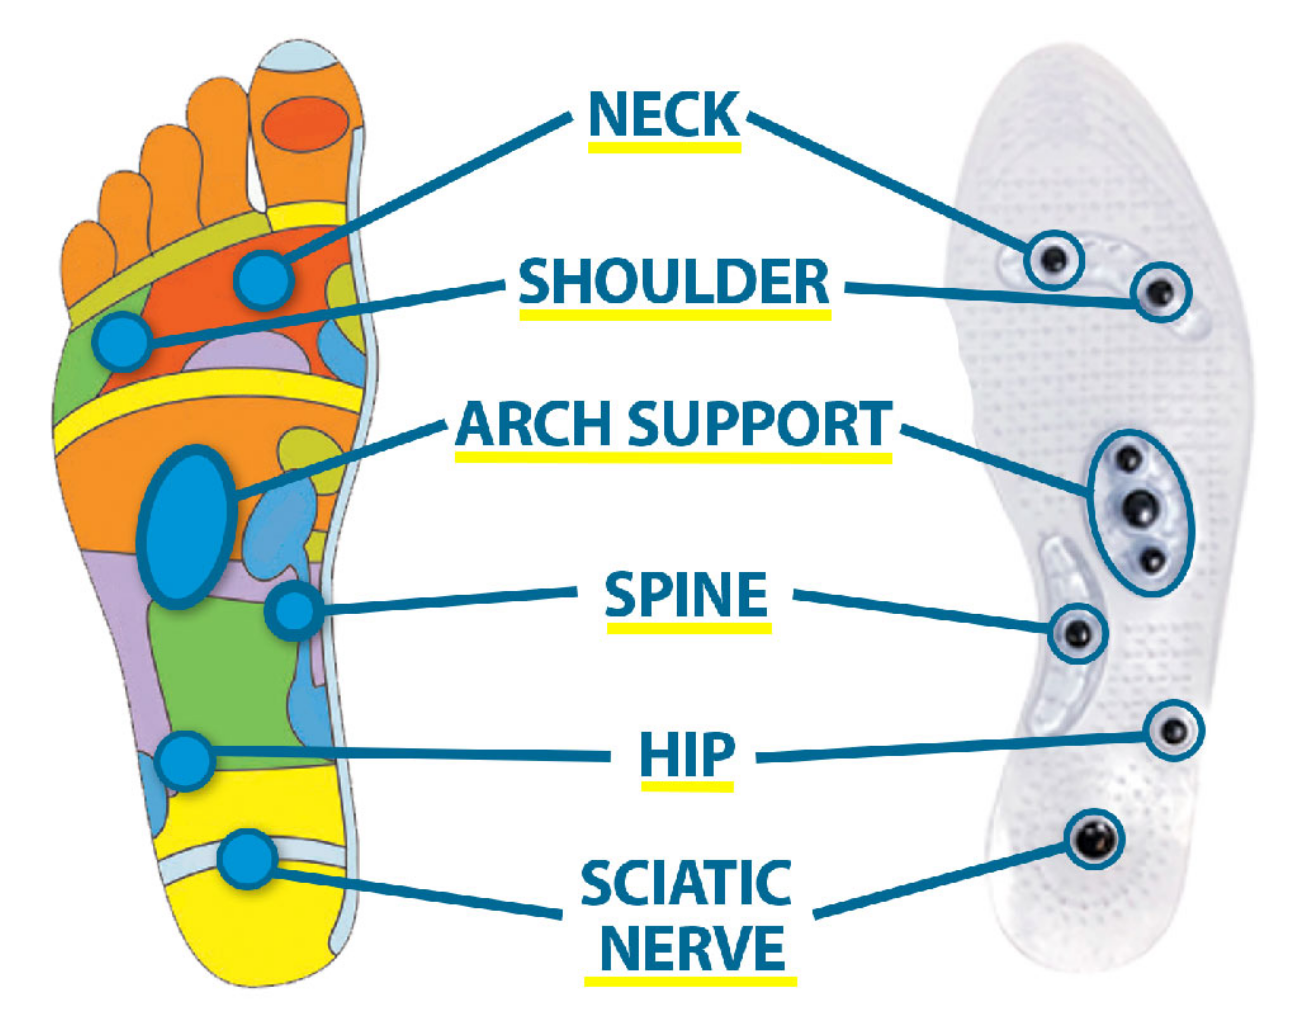 insoles for back pain